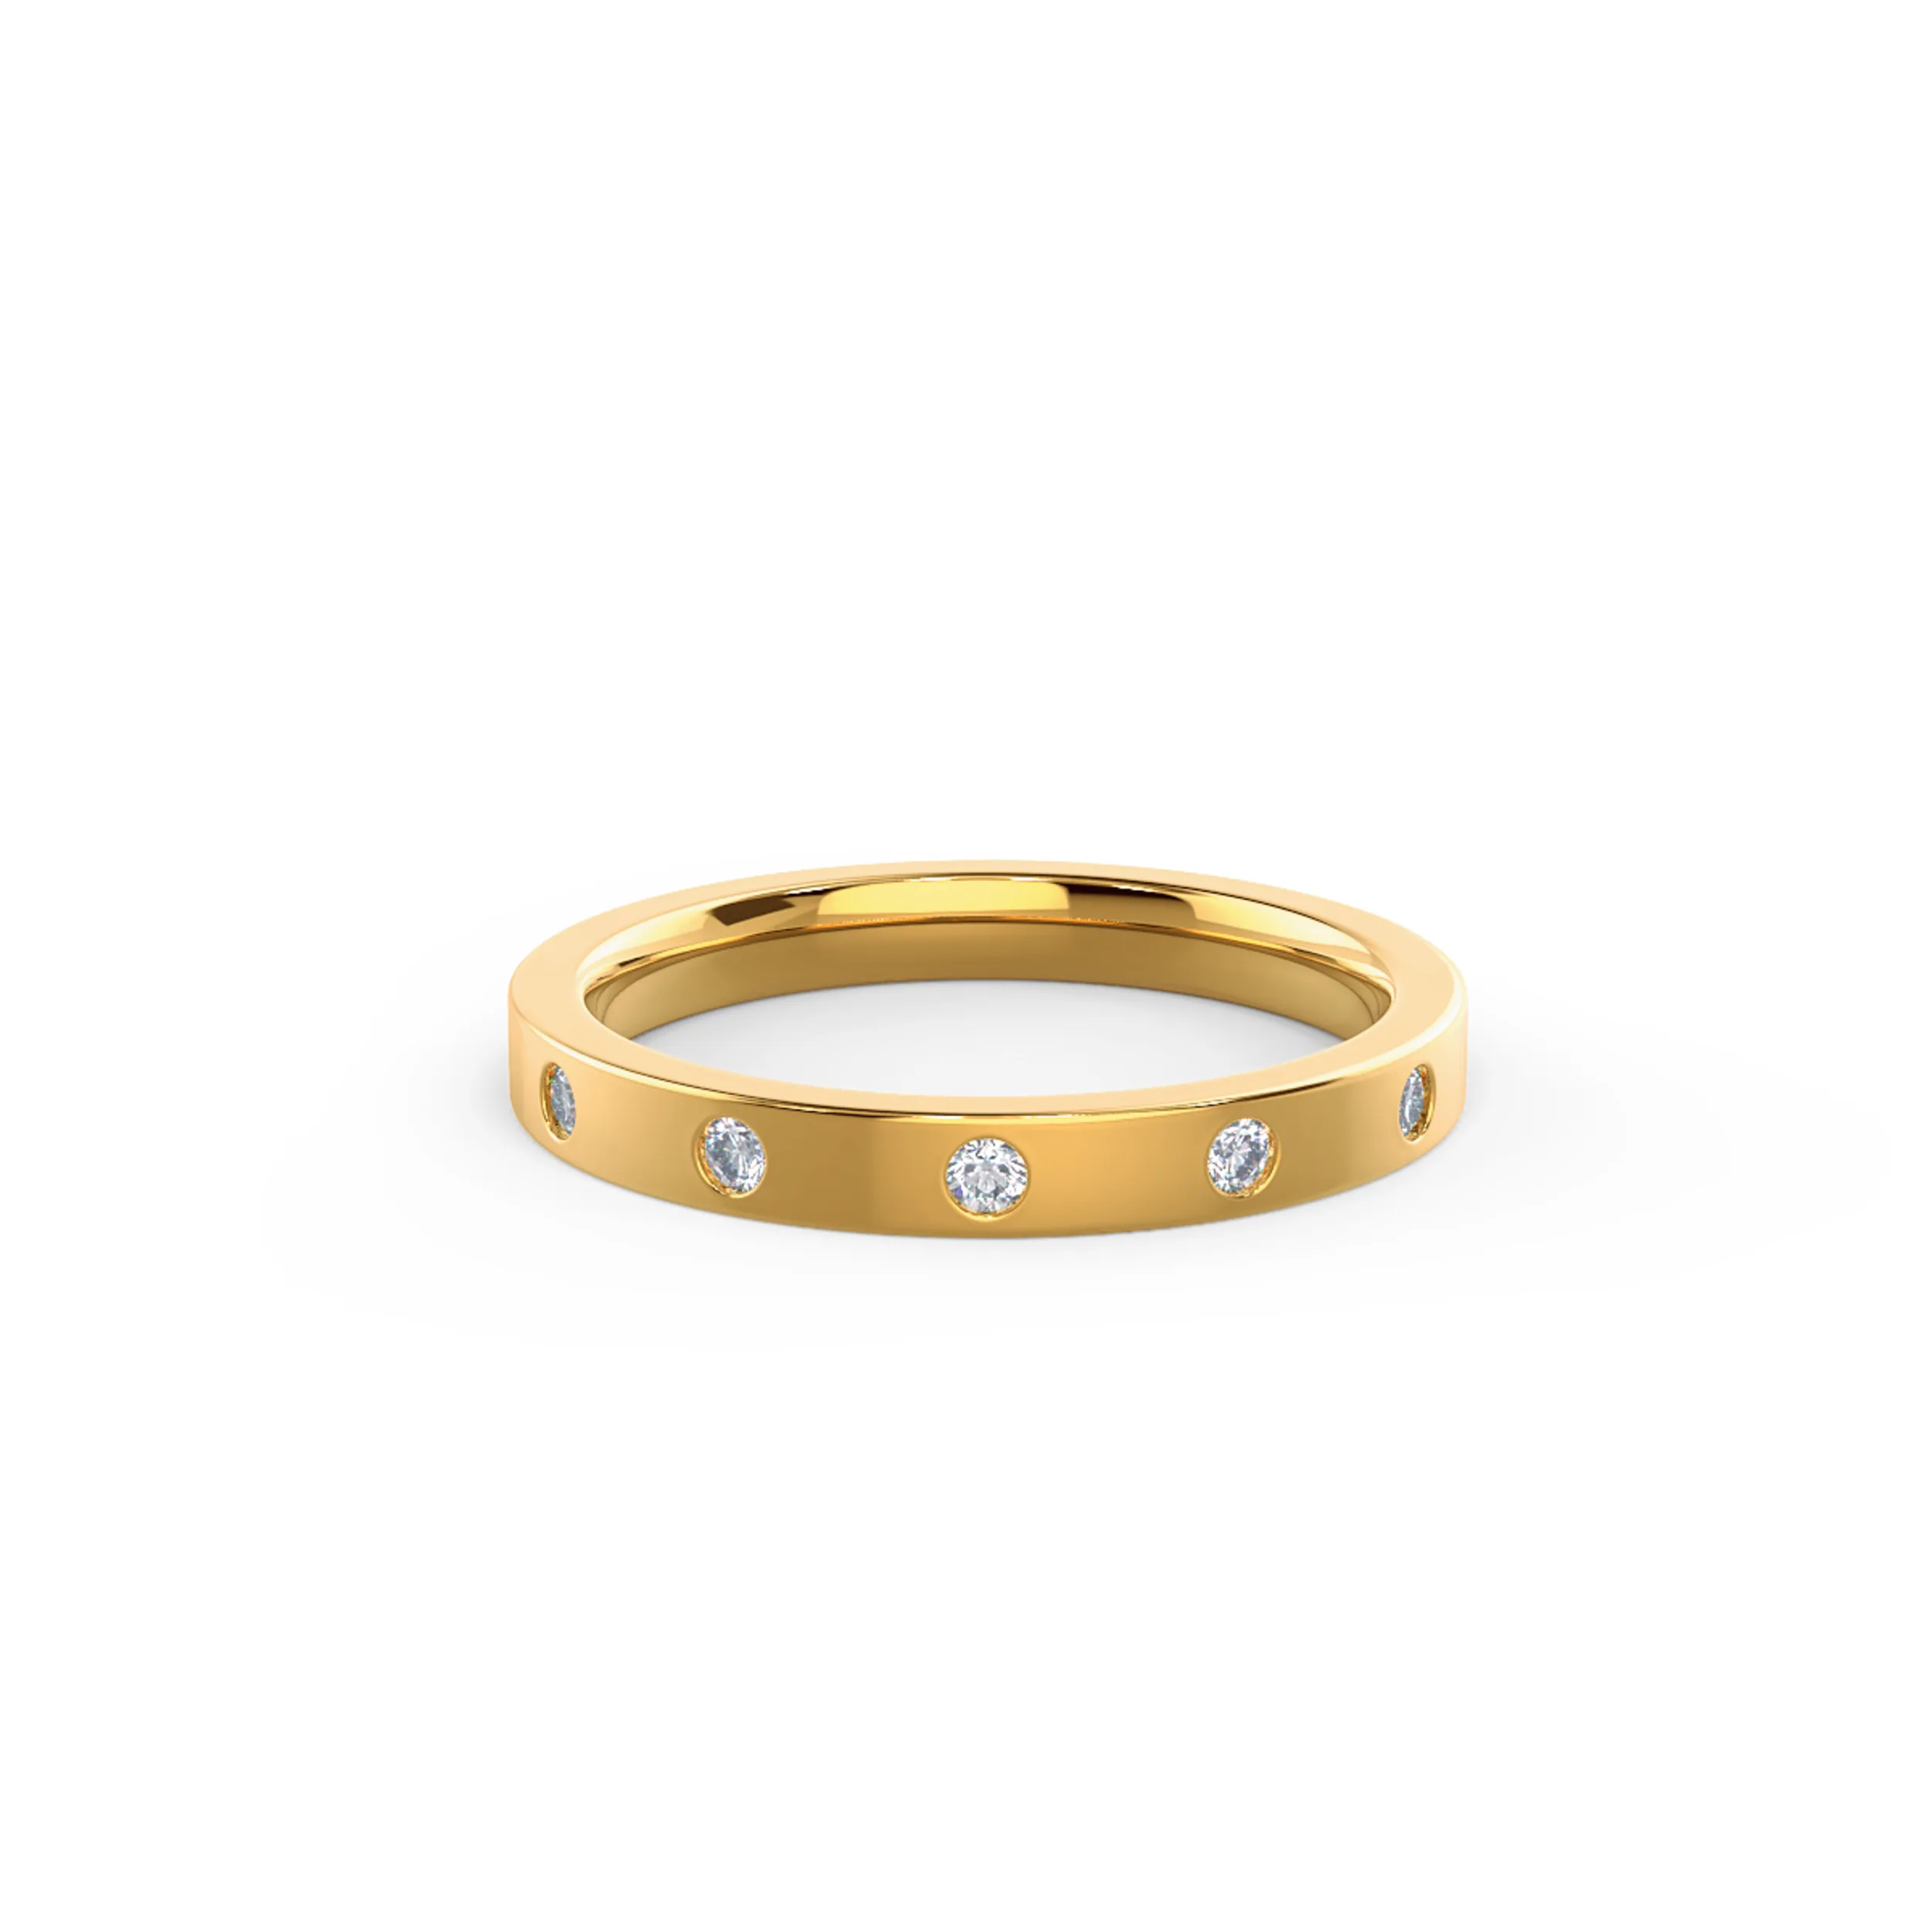 Exceptional Quality 0.3 Carat Round Brilliant Diamonds Flat Flush Set Eternity Band in 14k Yellow Gold (Main View)